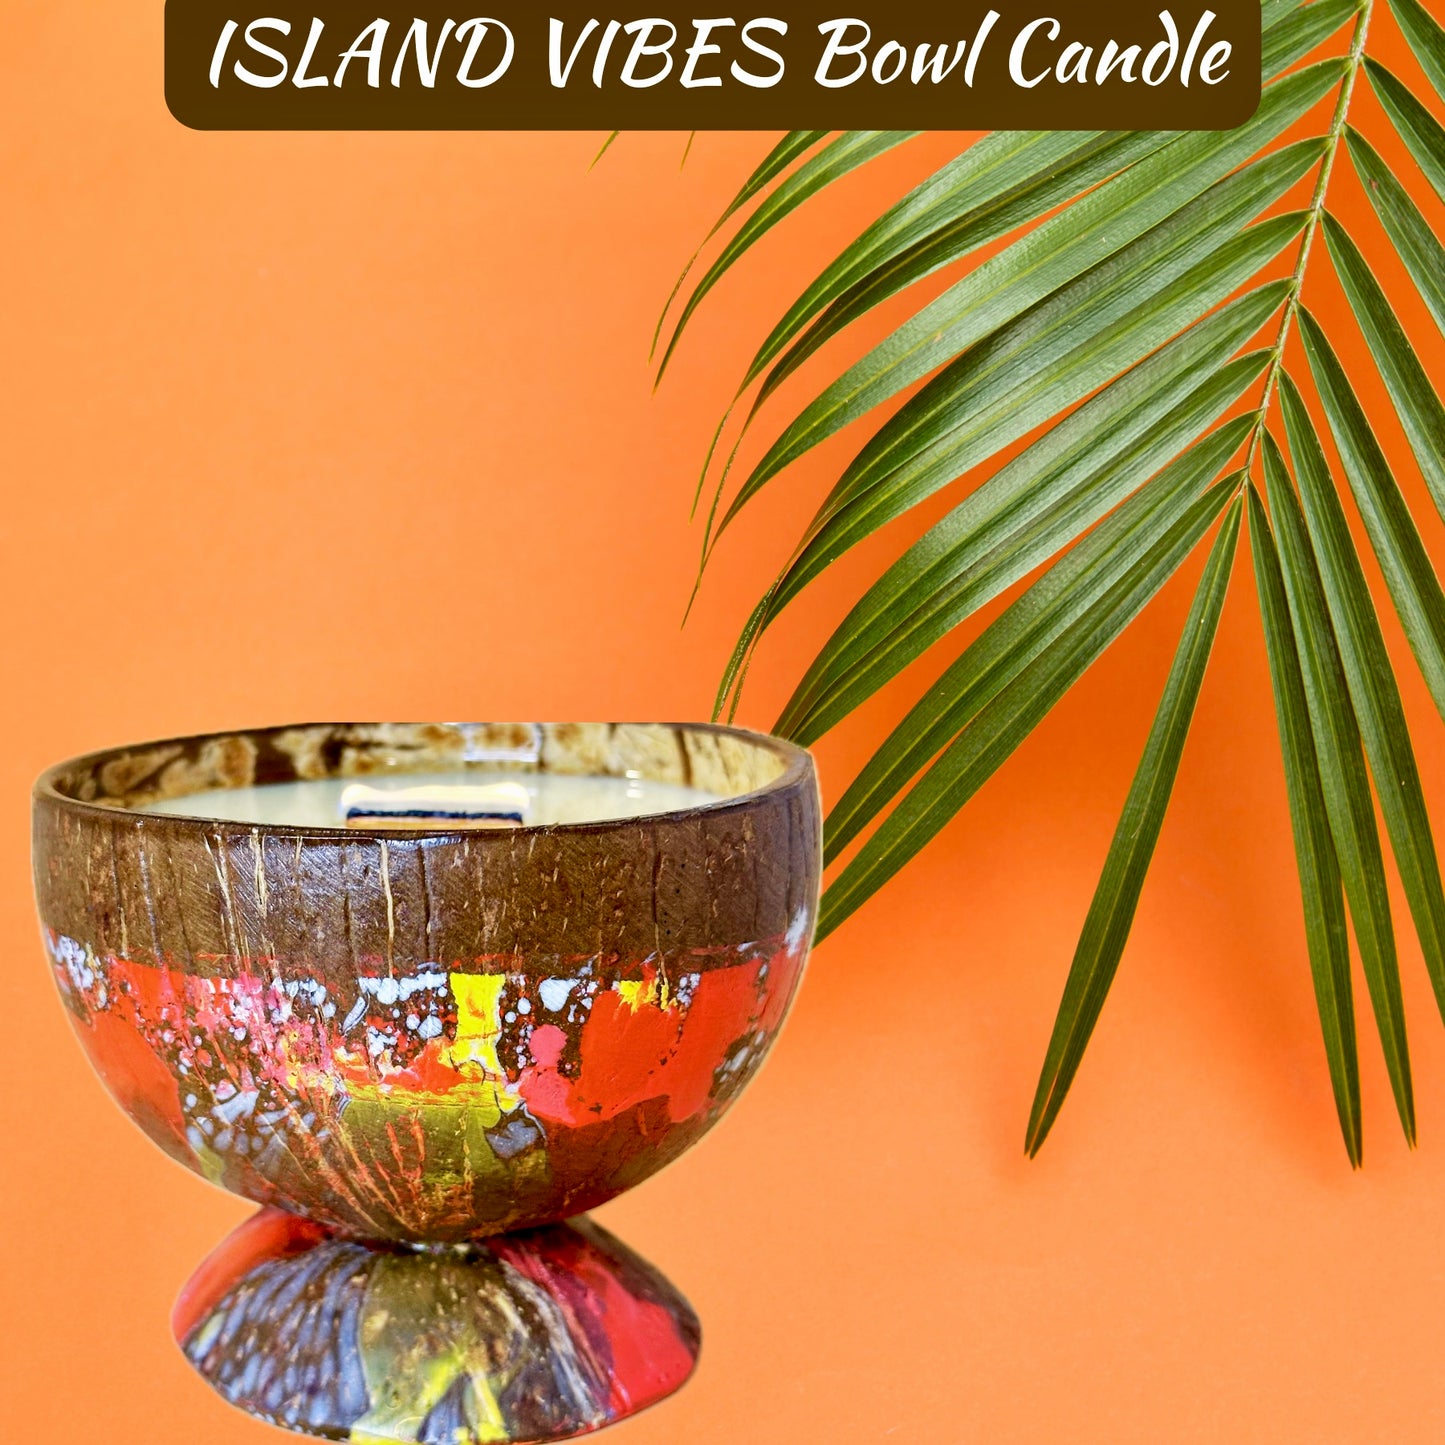 ISLAND VIBES Coconut Bowl Candle